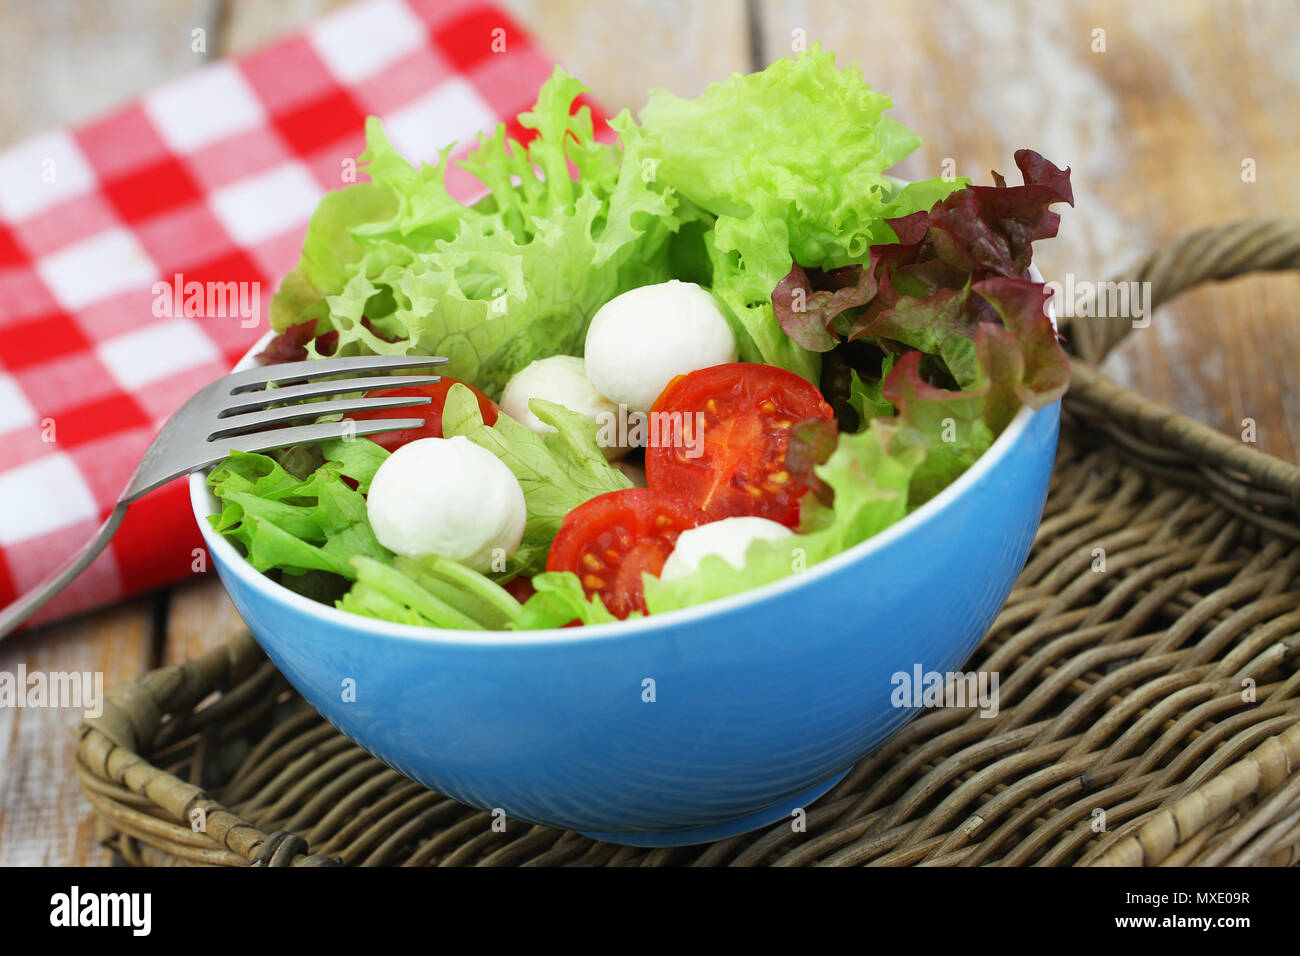 Fresh salad with mozzarella, lettuce and cherry tomatoes in blue bowl Stock Photo